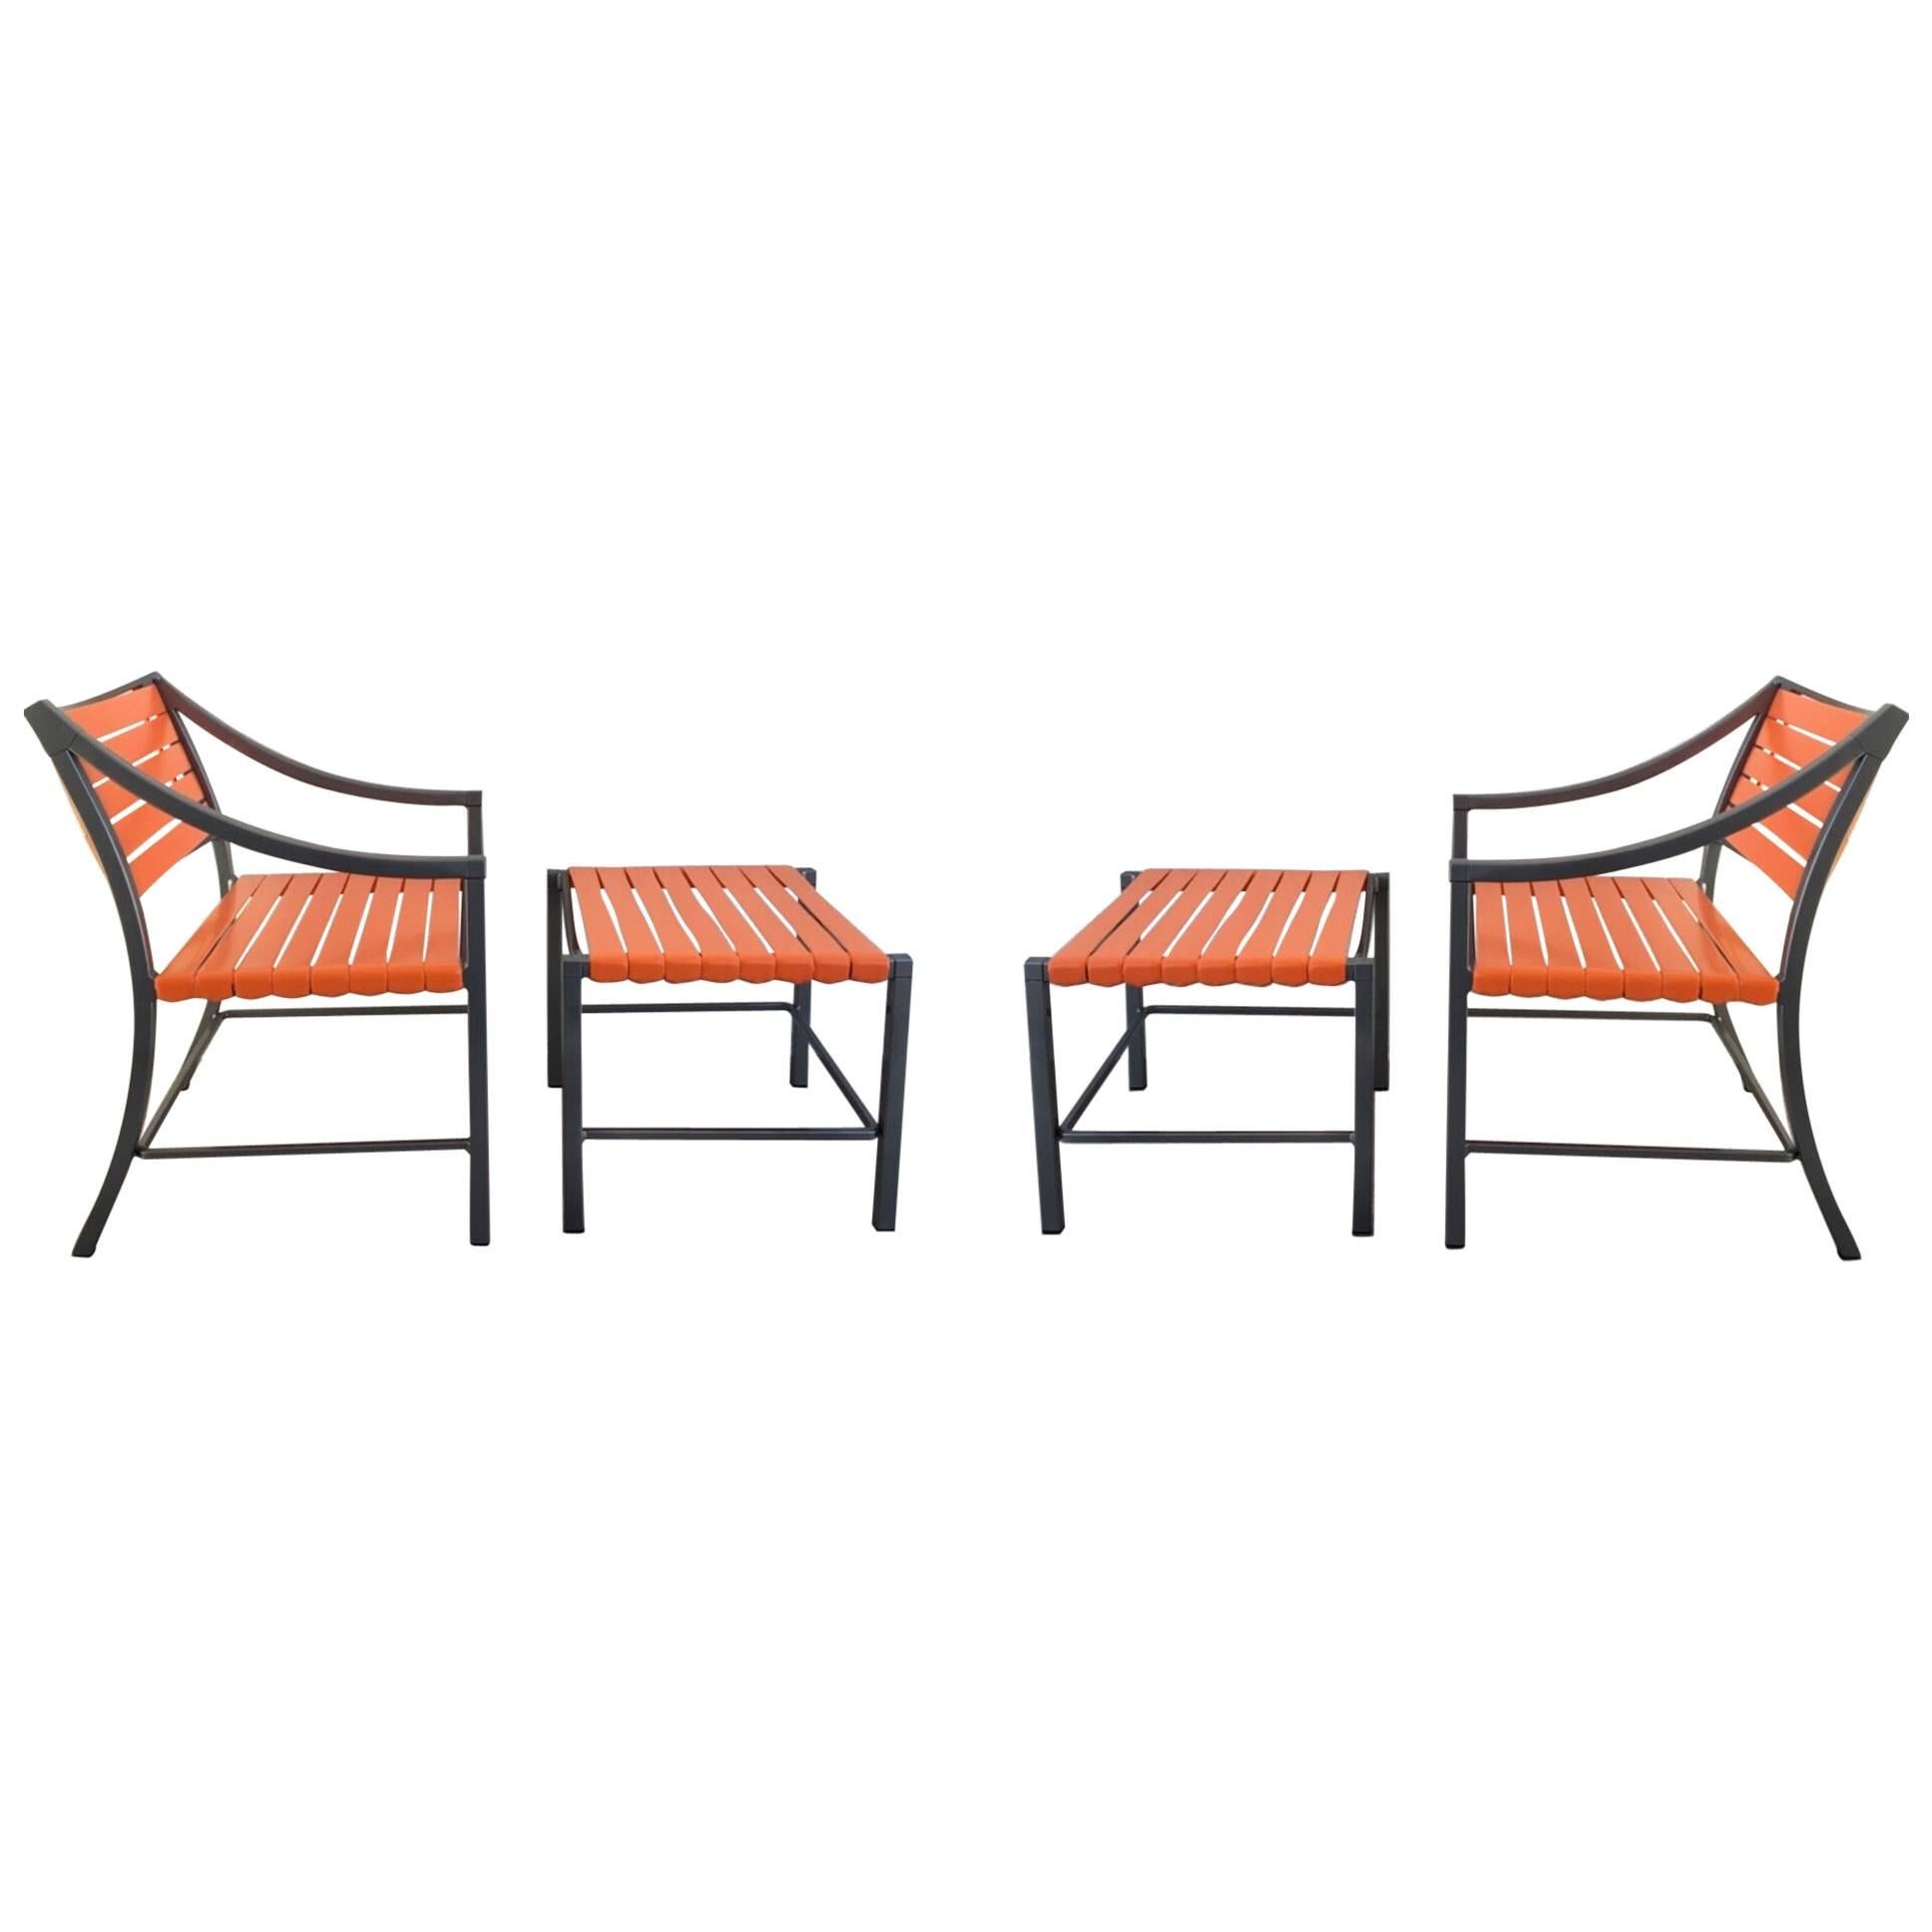 Pair of Outdoor Chairs and Ottomans by Brown Jordan